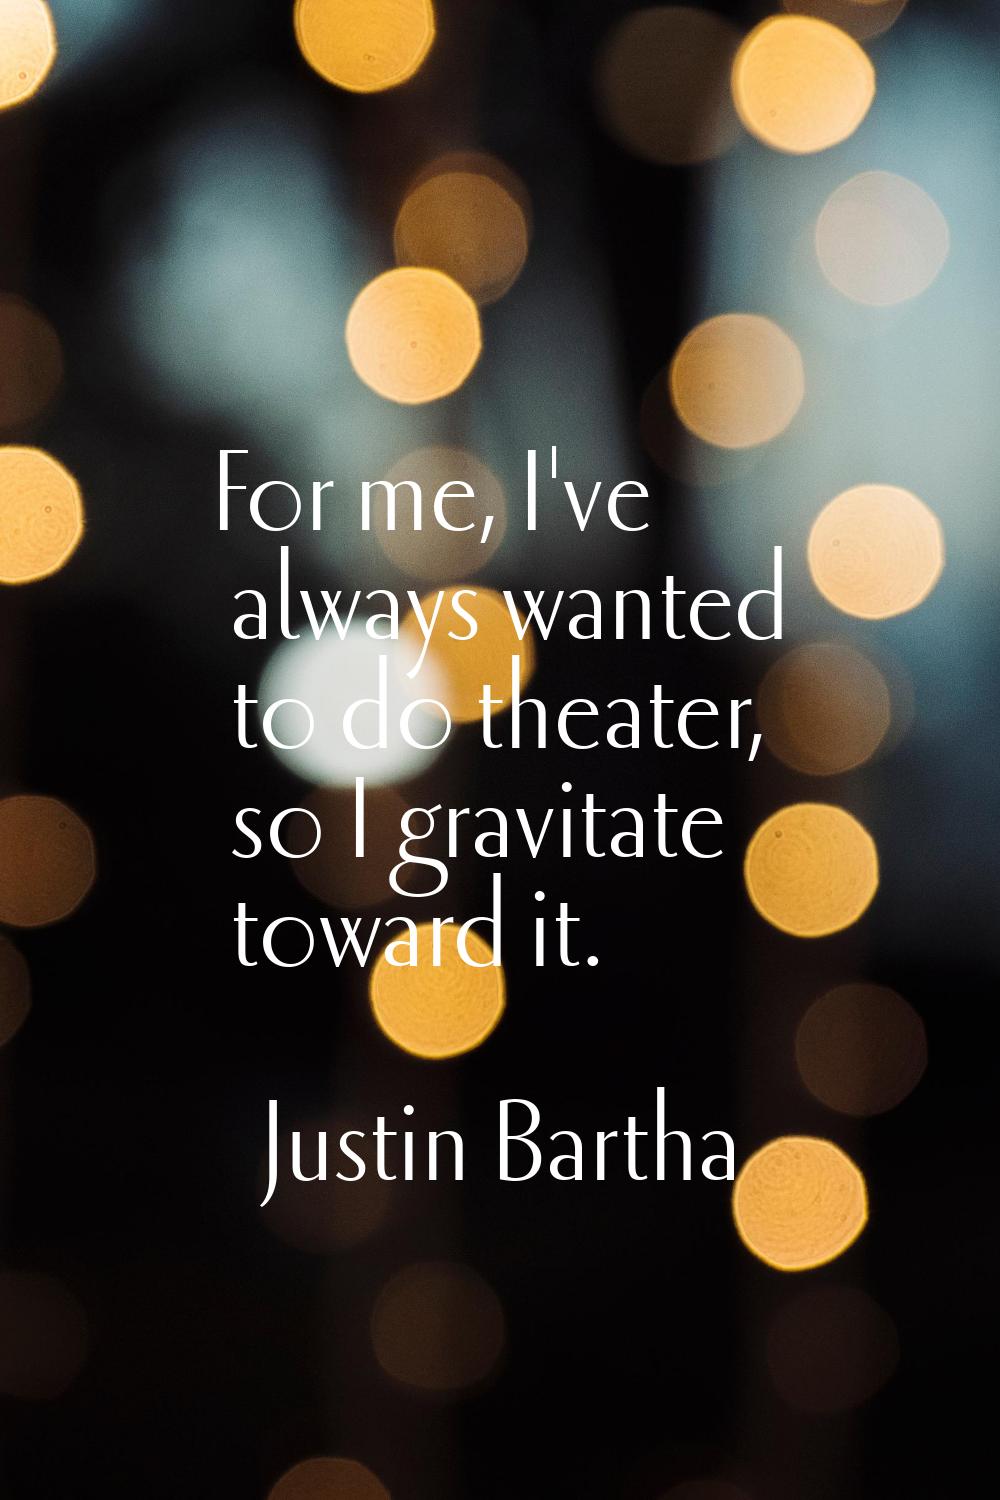 For me, I've always wanted to do theater, so I gravitate toward it.